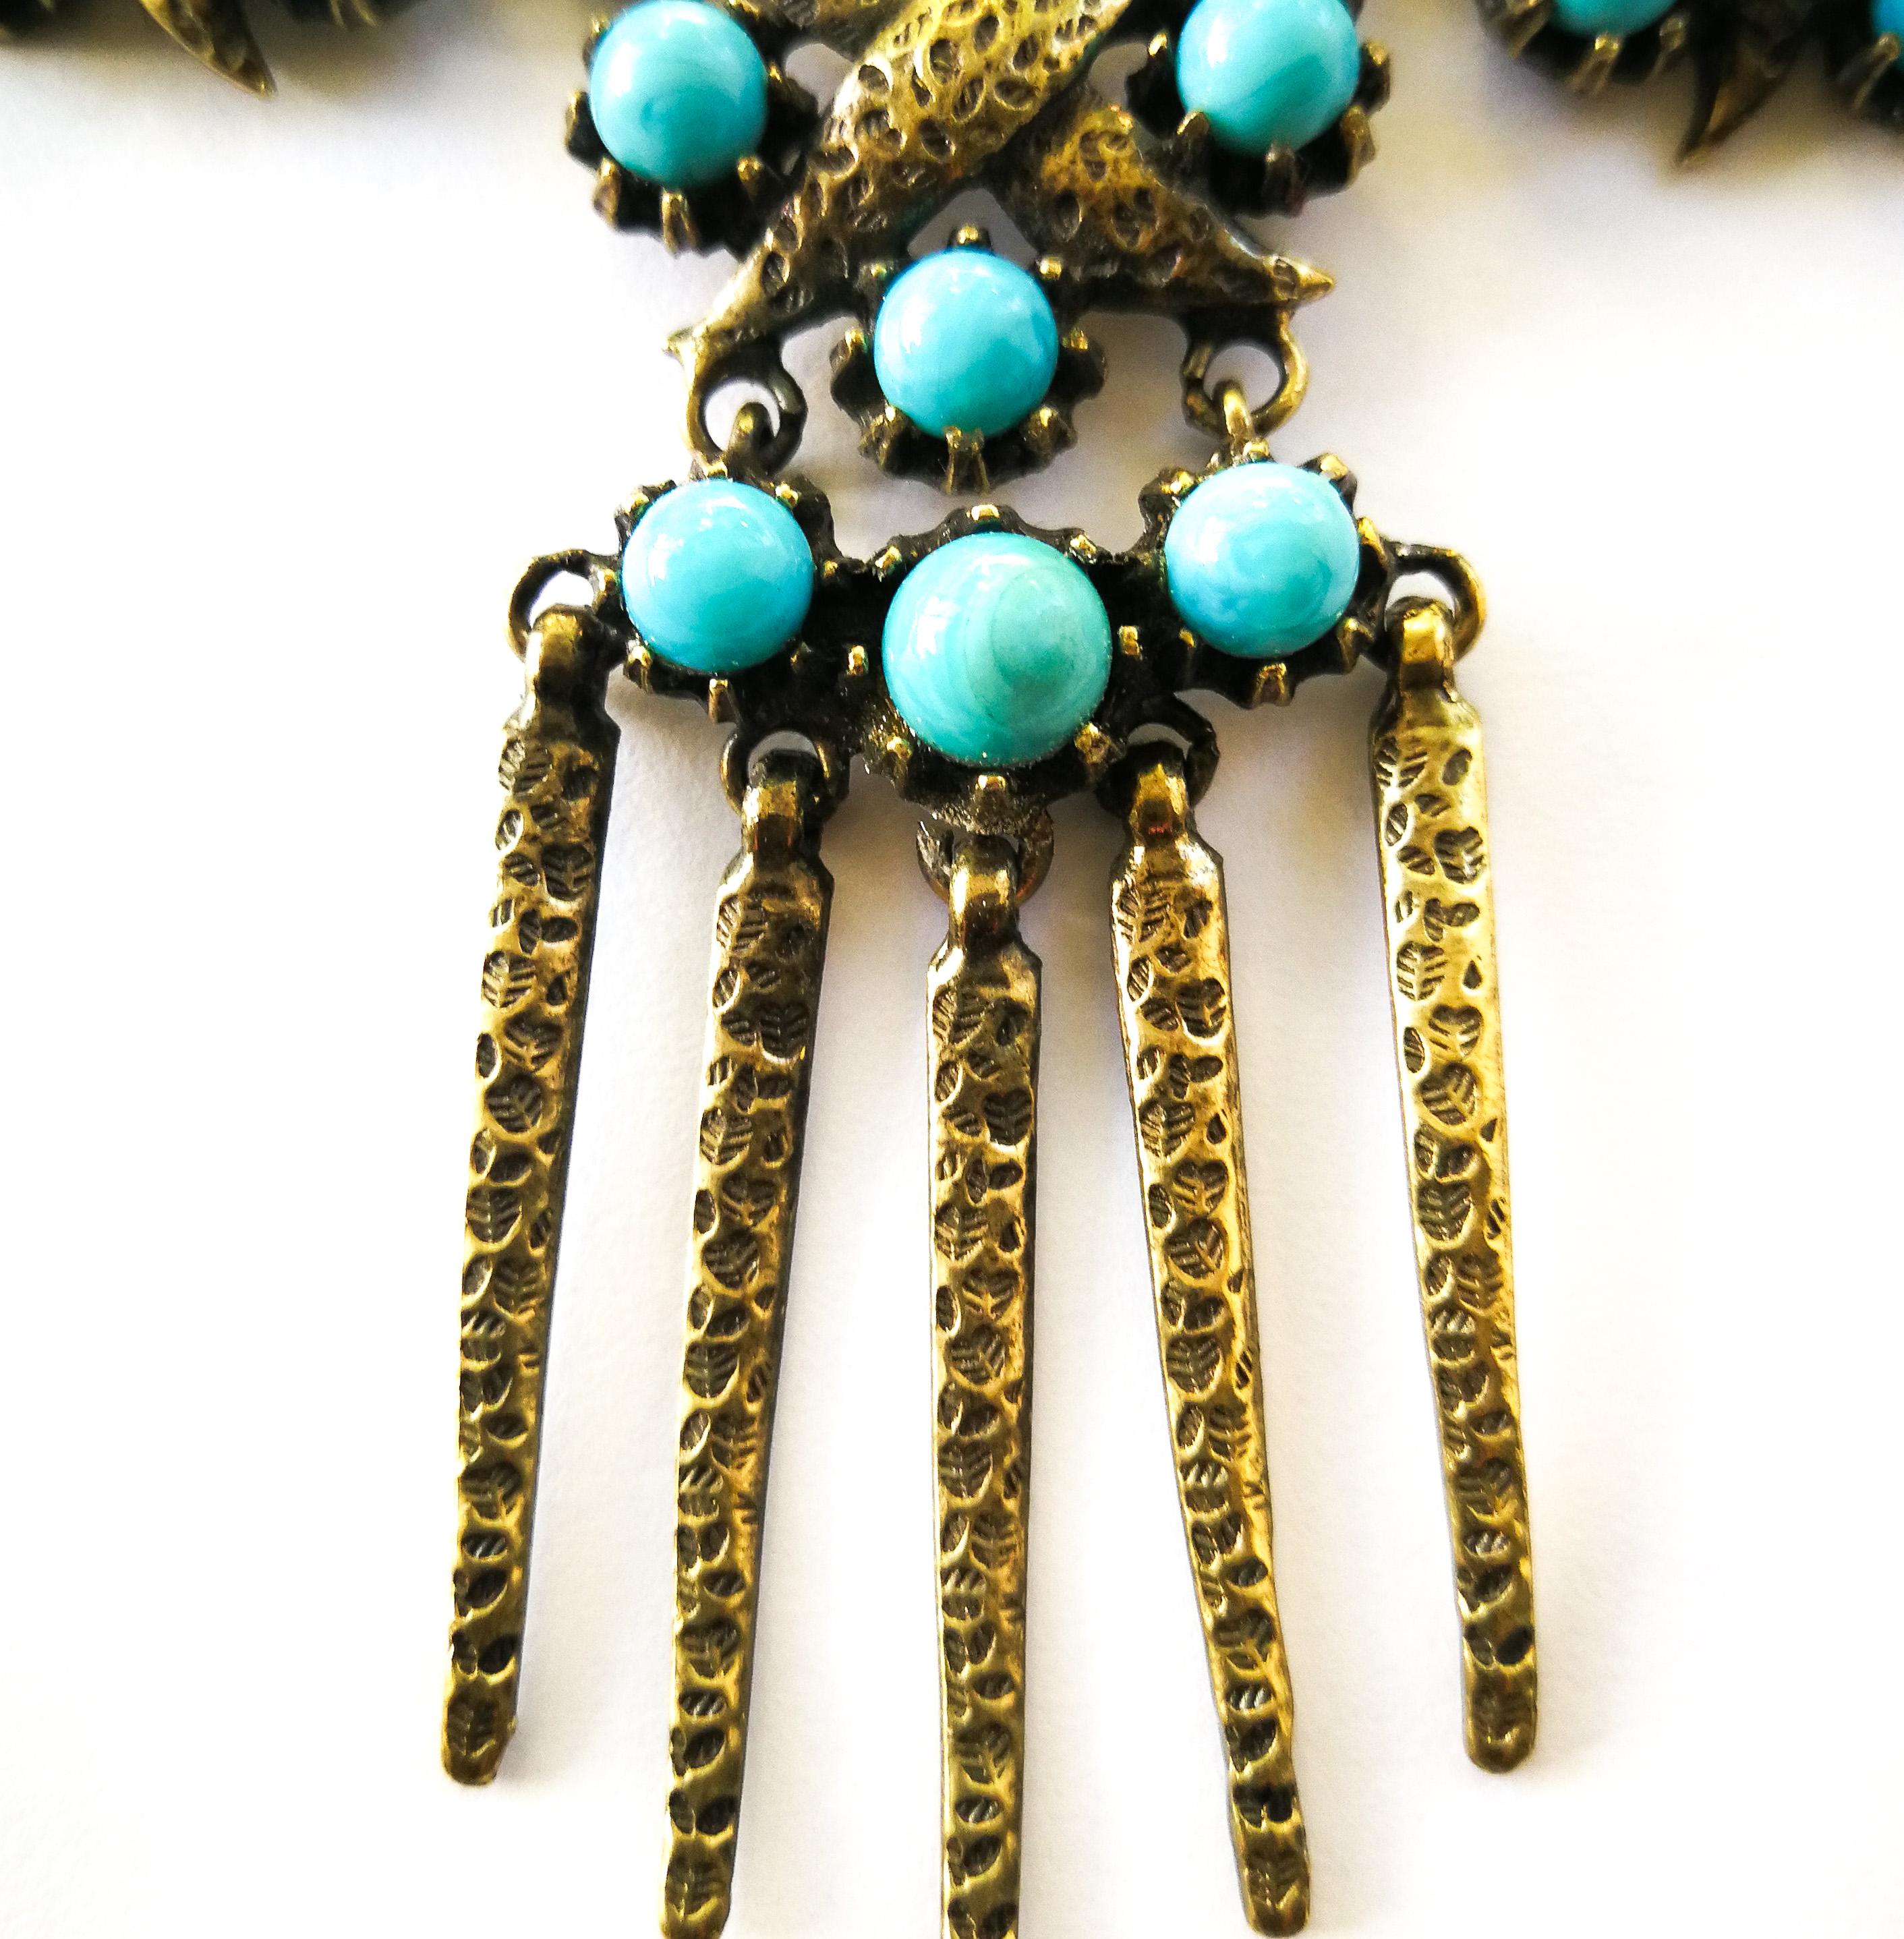 dior turquoise necklace